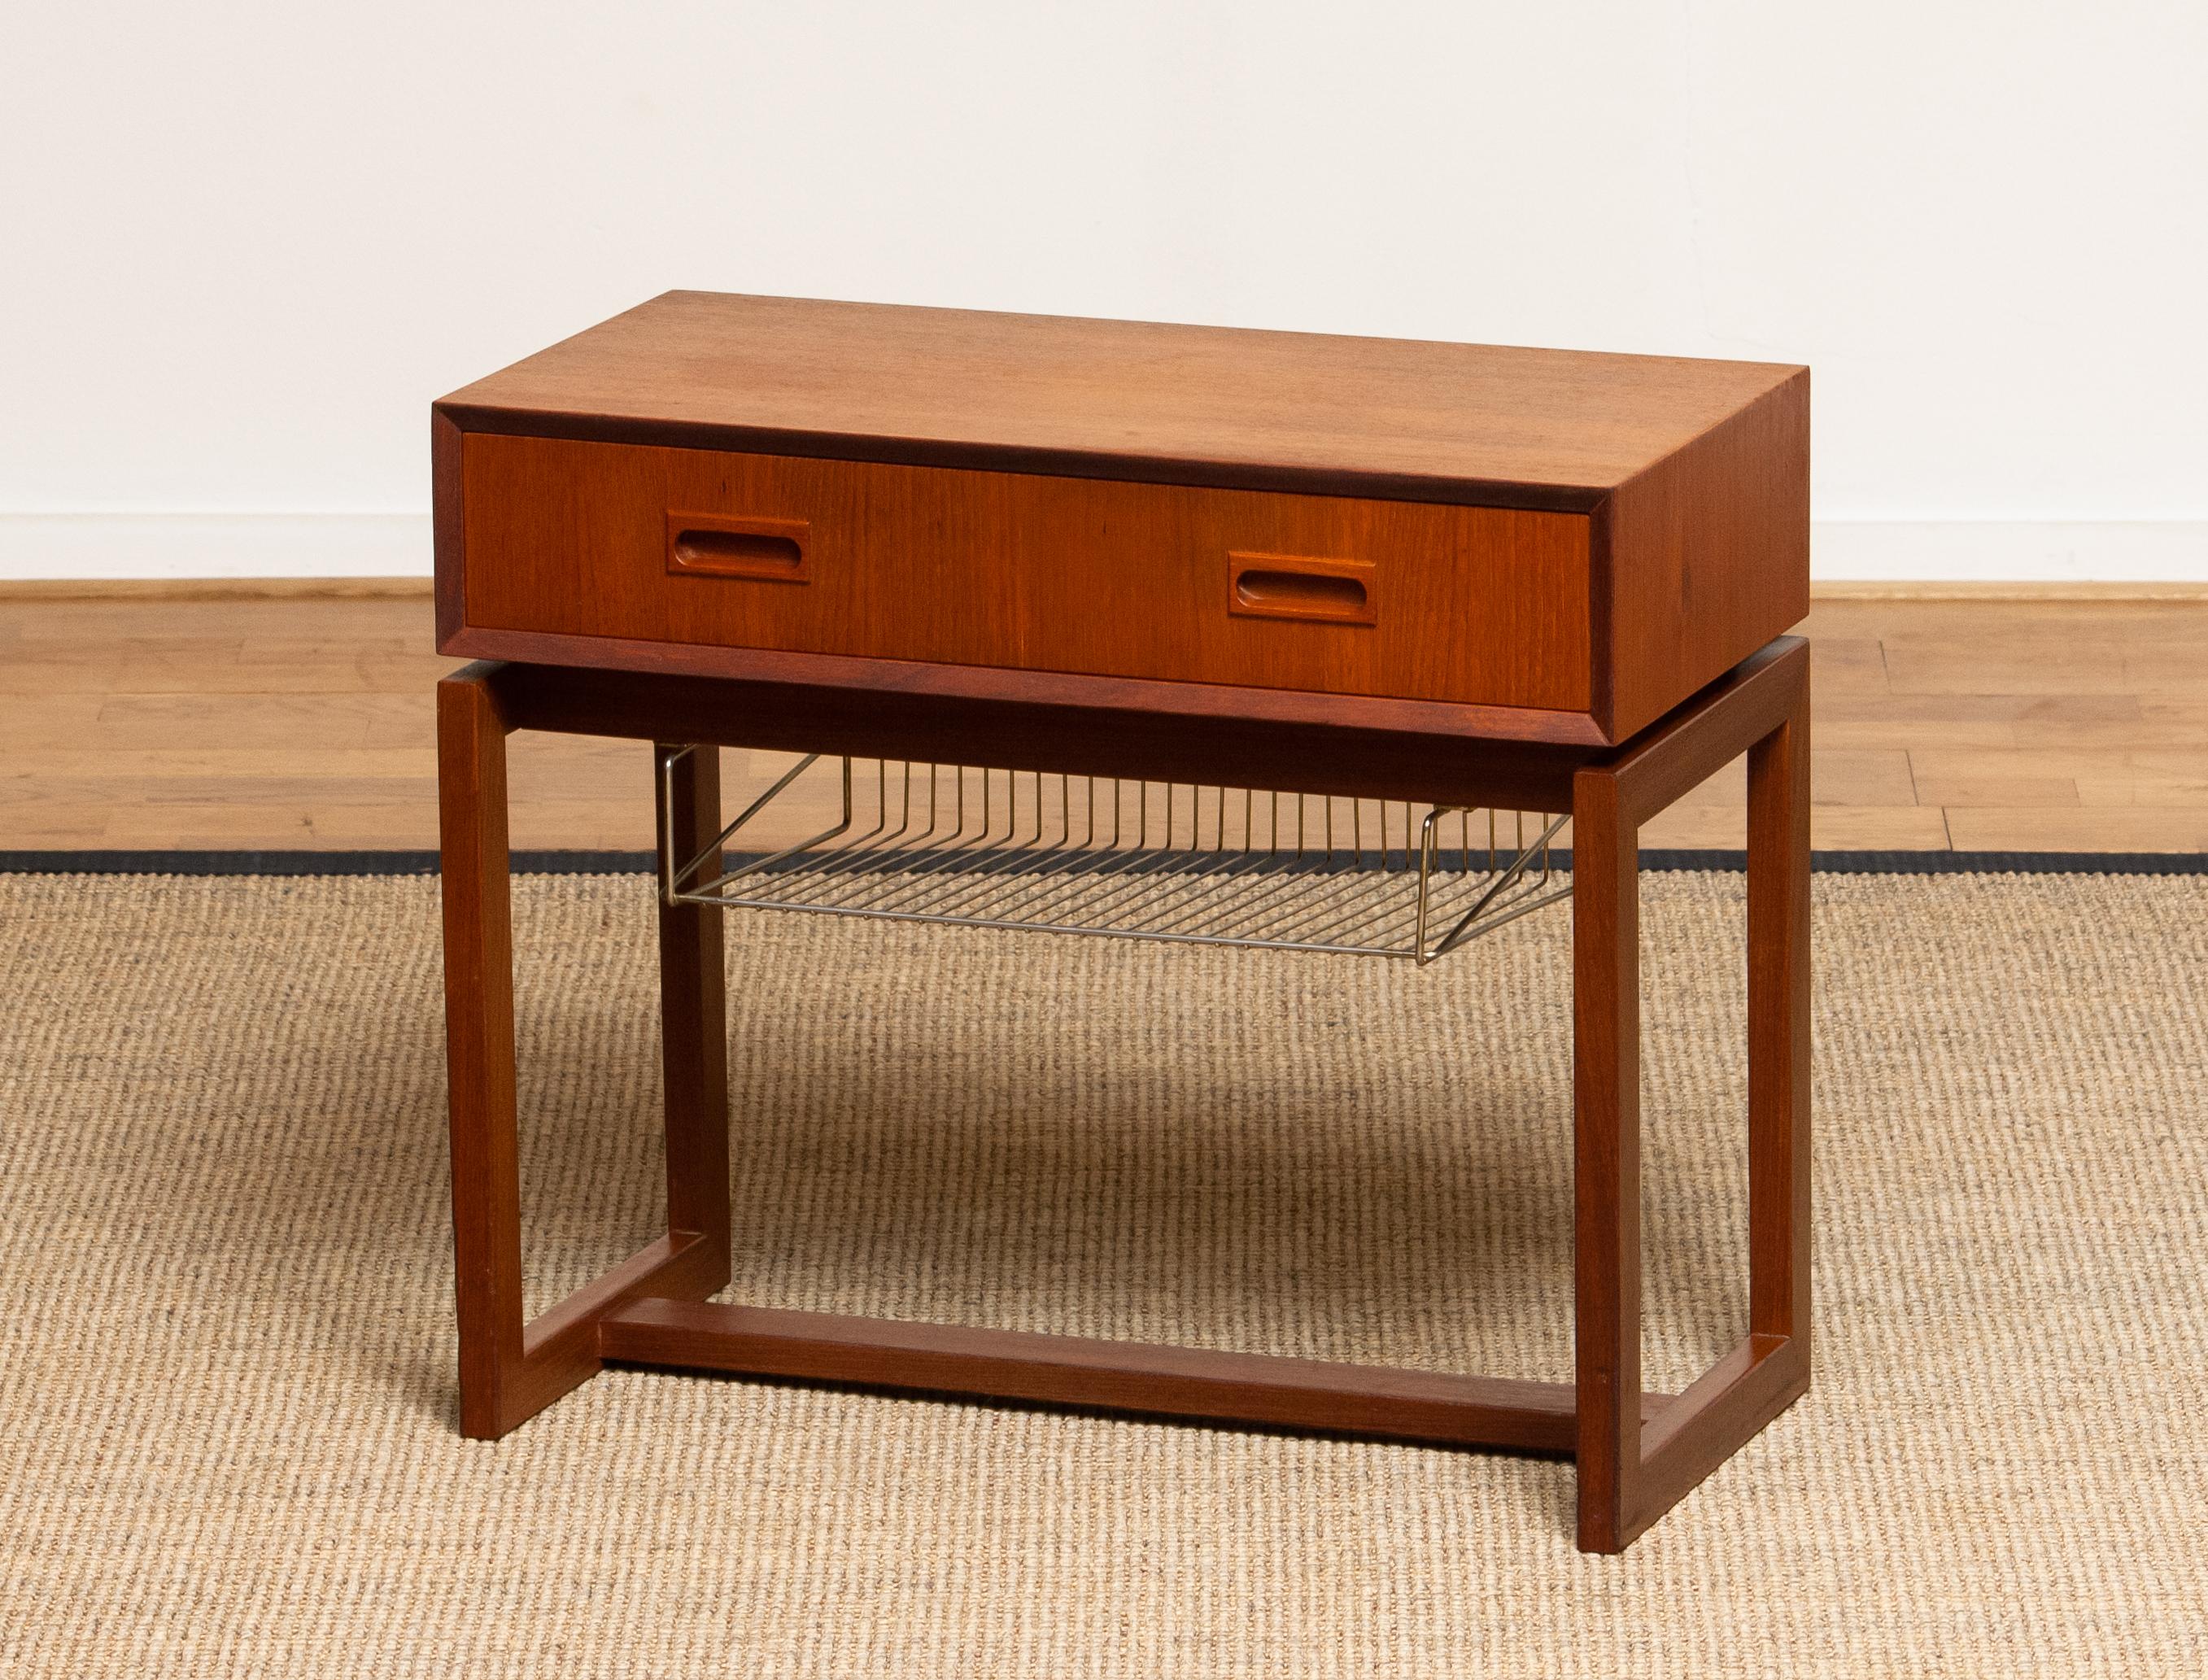 1960's Teak Hall Cabinet Side Table from Denmark with Brass Paper Rack 1